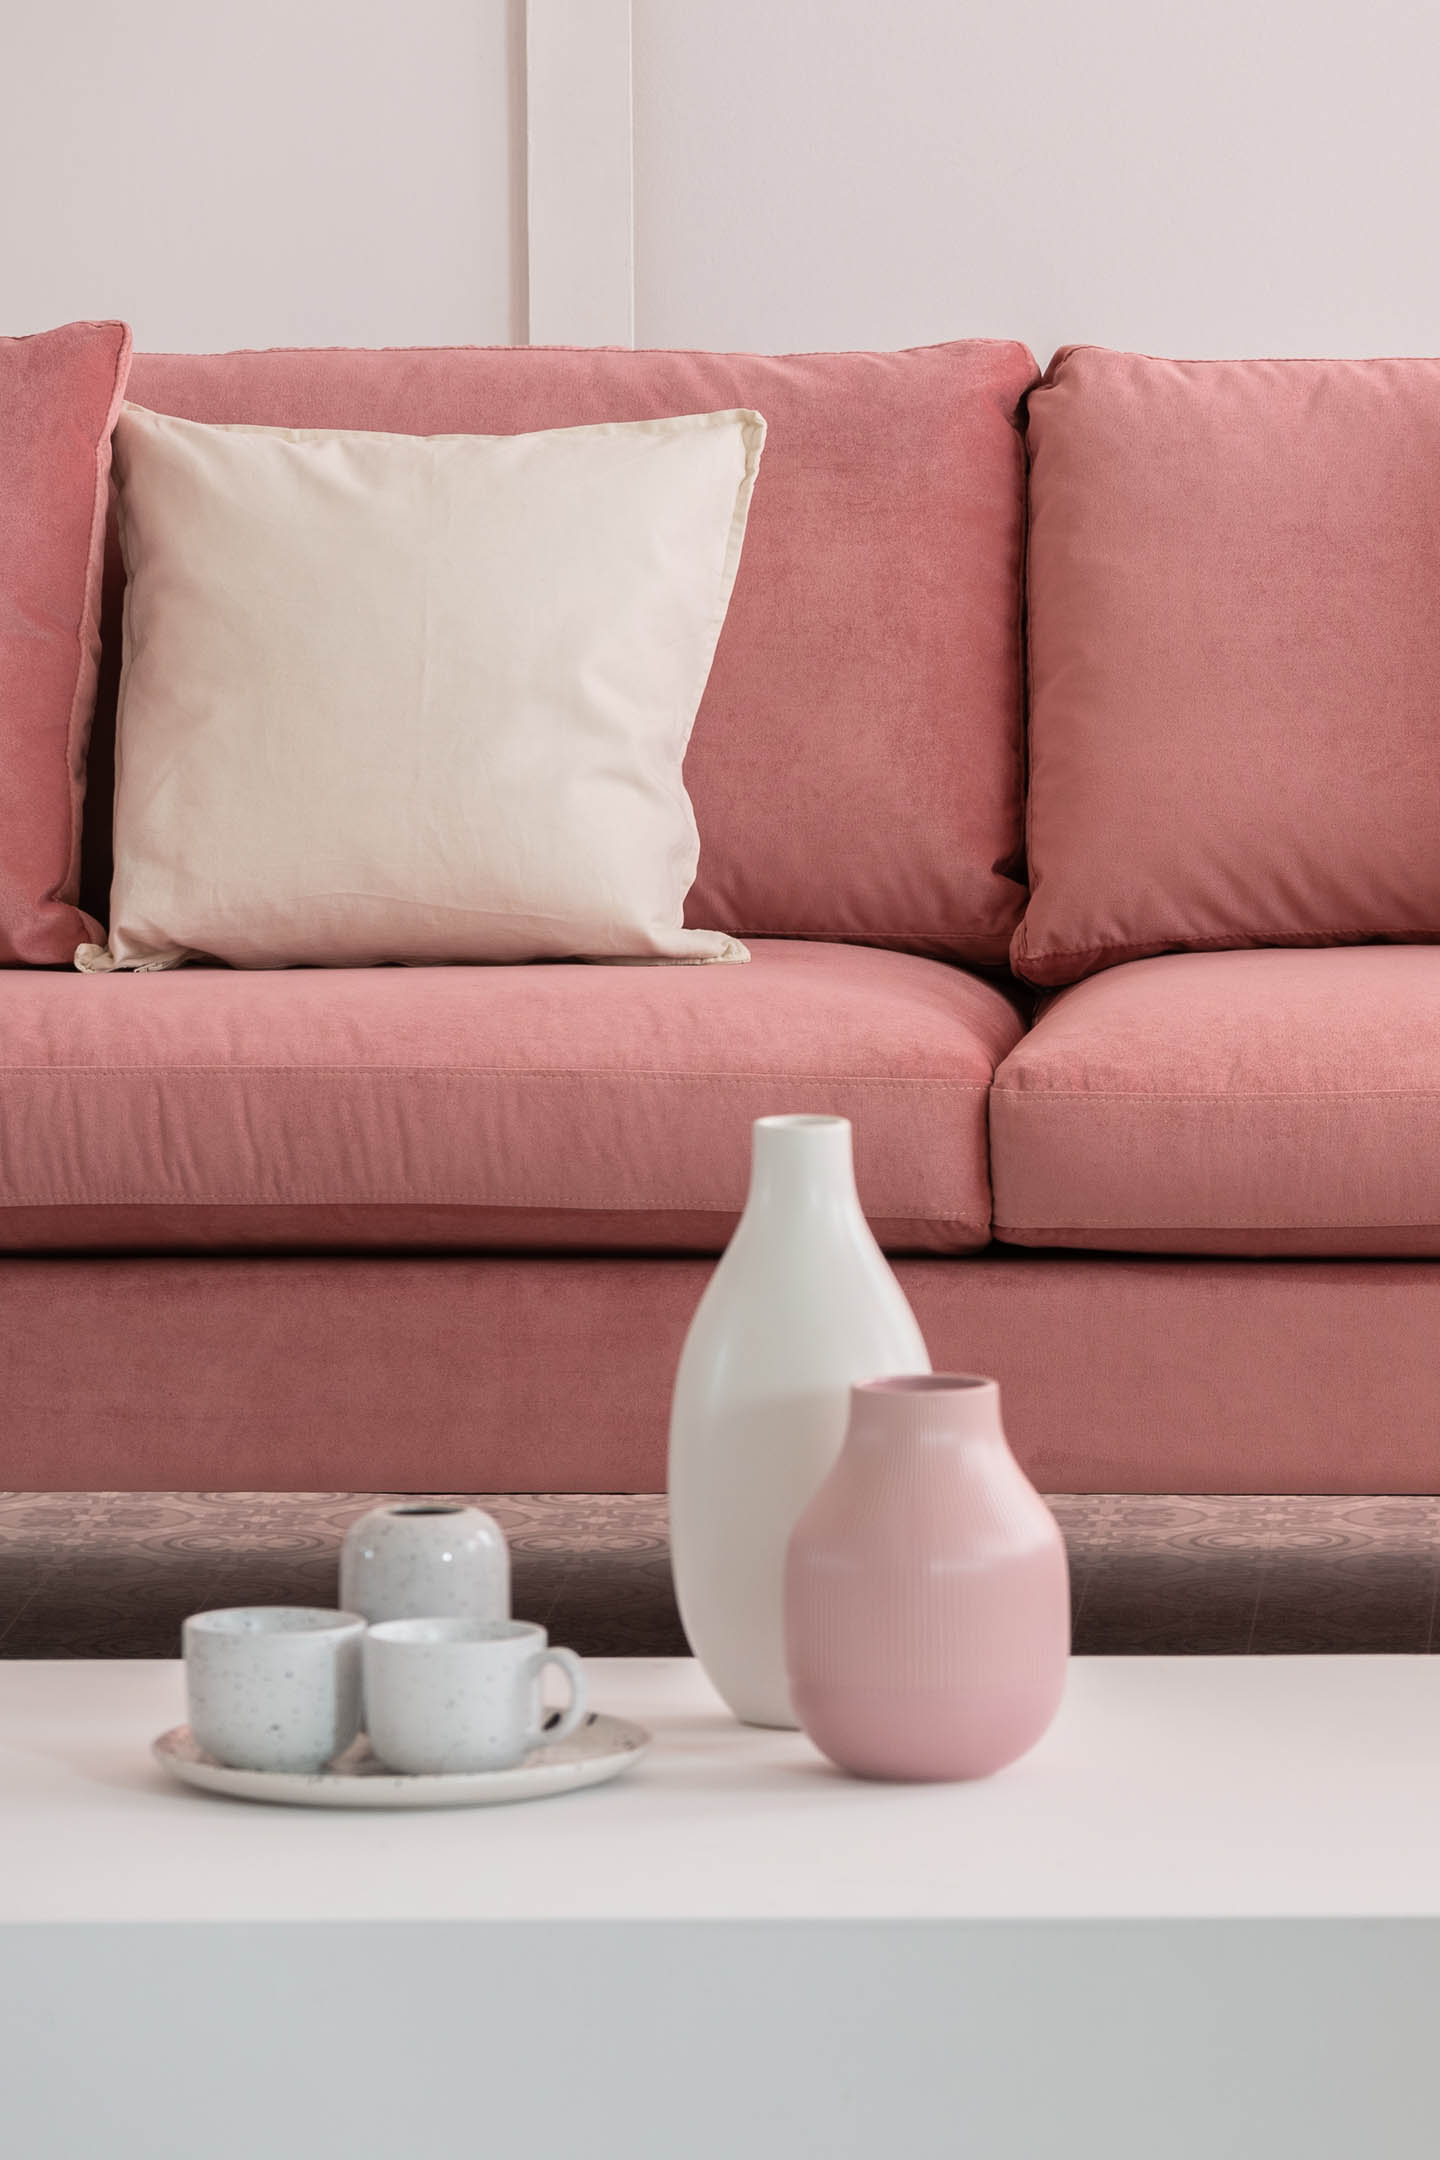 Pink and white vases arranged on a white coffee table in front of a pink sofa with white cushions